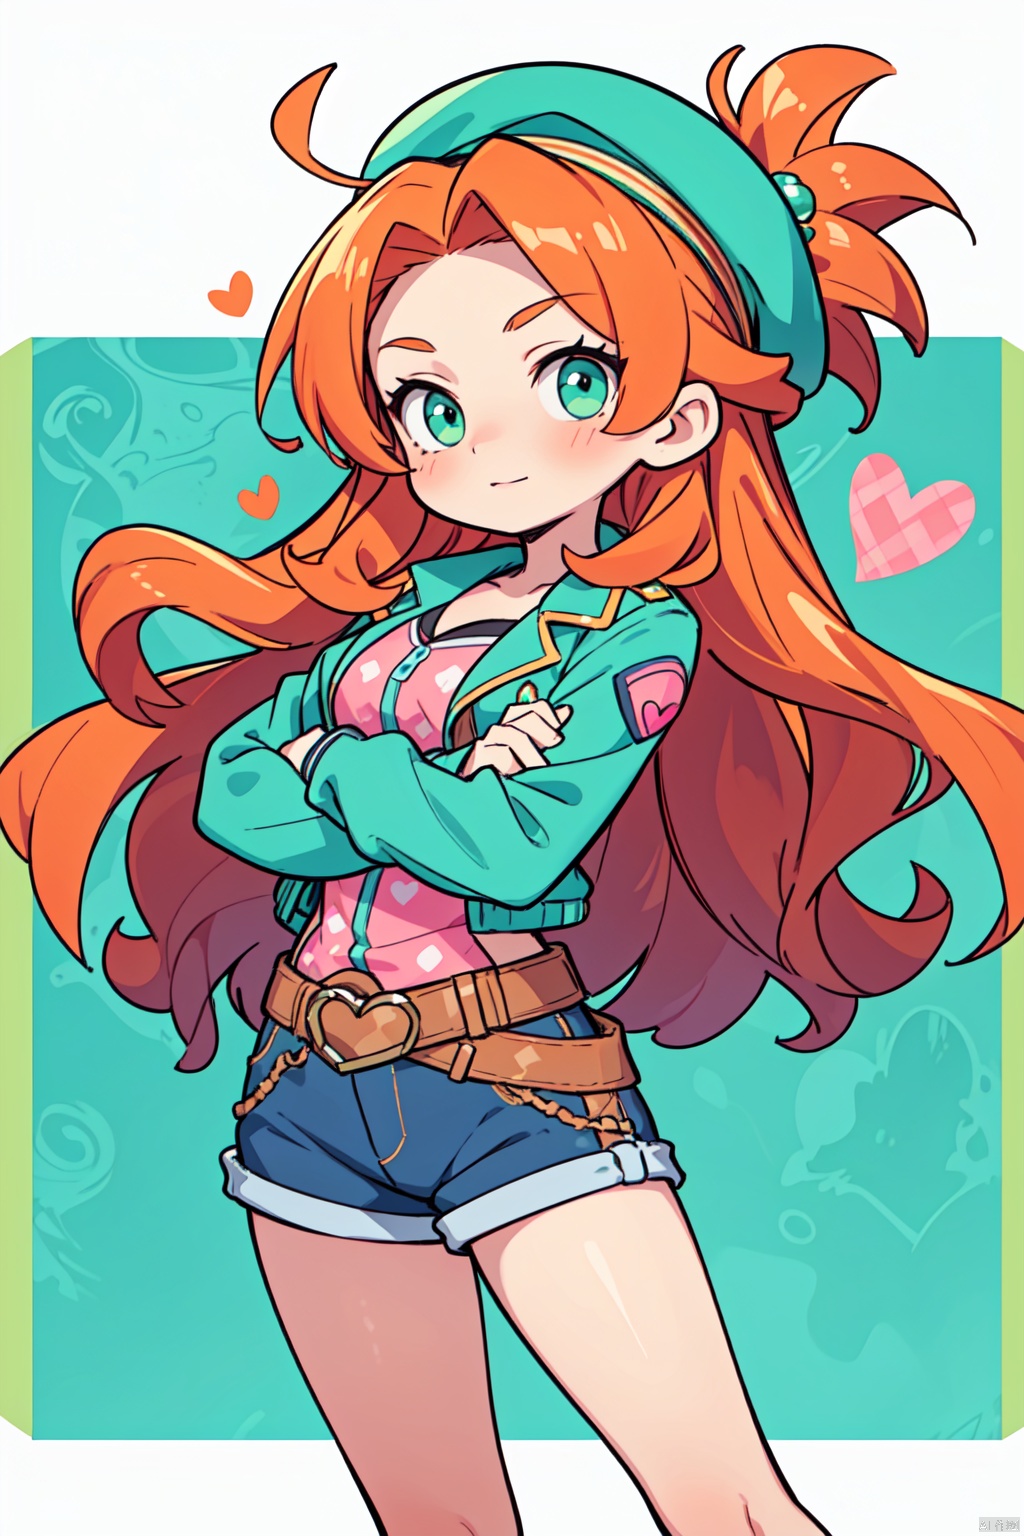 solo,(masterpiece), (best quality),A vibrant animated female character with long wavy orange hair, green eyes, and a playful expression is dressed in a teal jacket with a heart patch and a pink beret. She's seen from the waist up and is posed with her arms crossed, exuding a sense of confidence